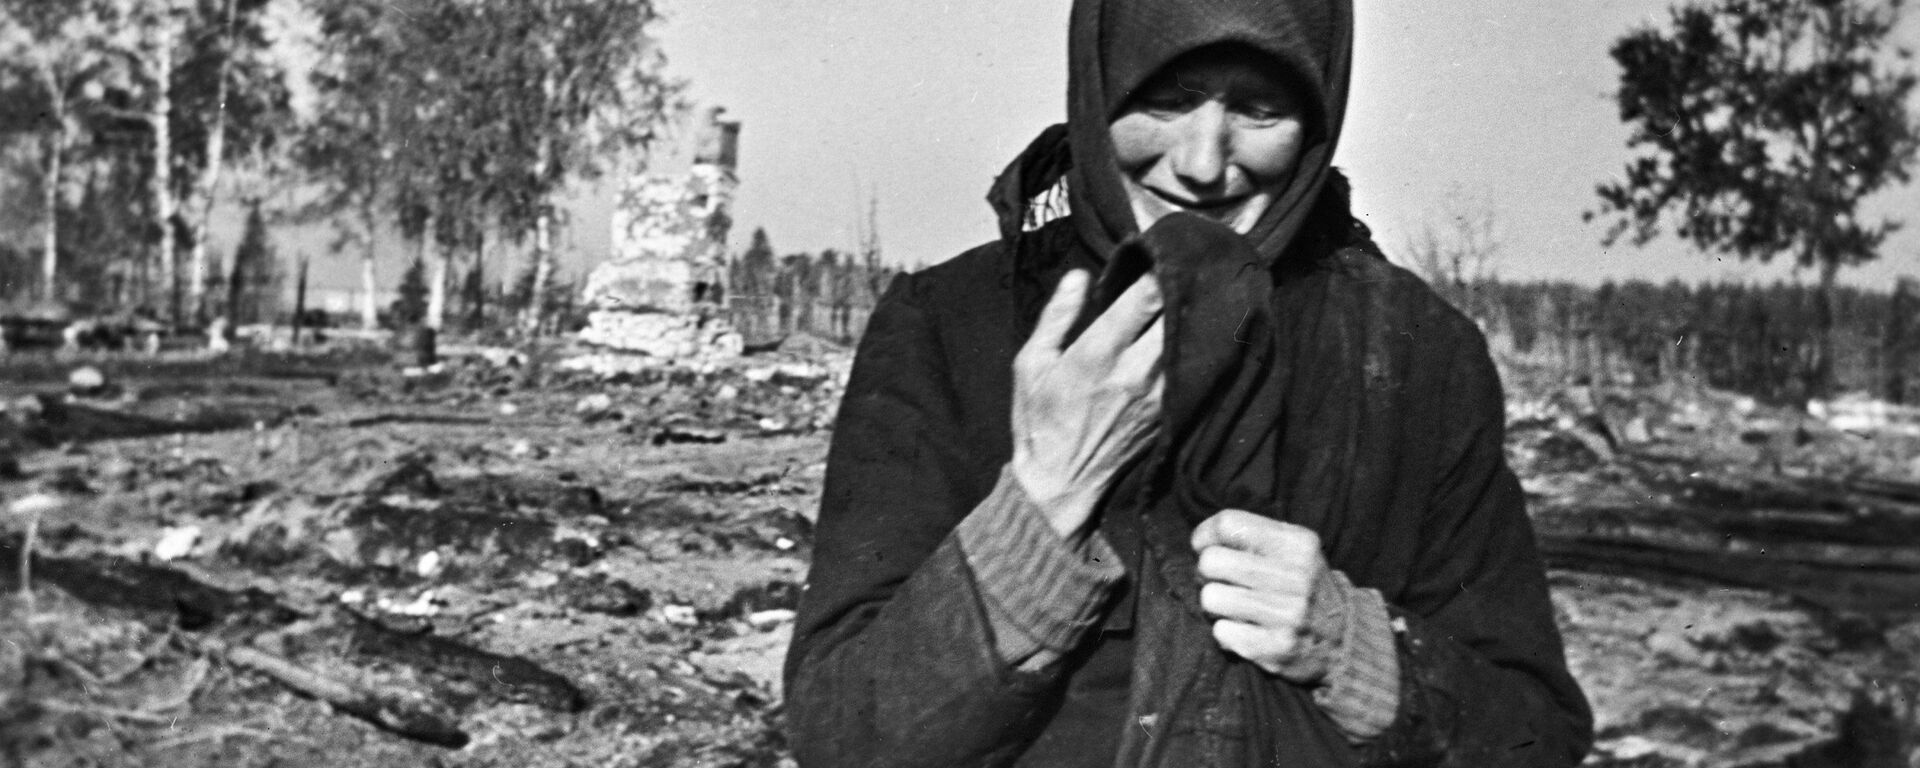 Woman weeping on the ruins of her native village burnt by the Nazis in the Second World War - Sputnik International, 1920, 06.05.2017